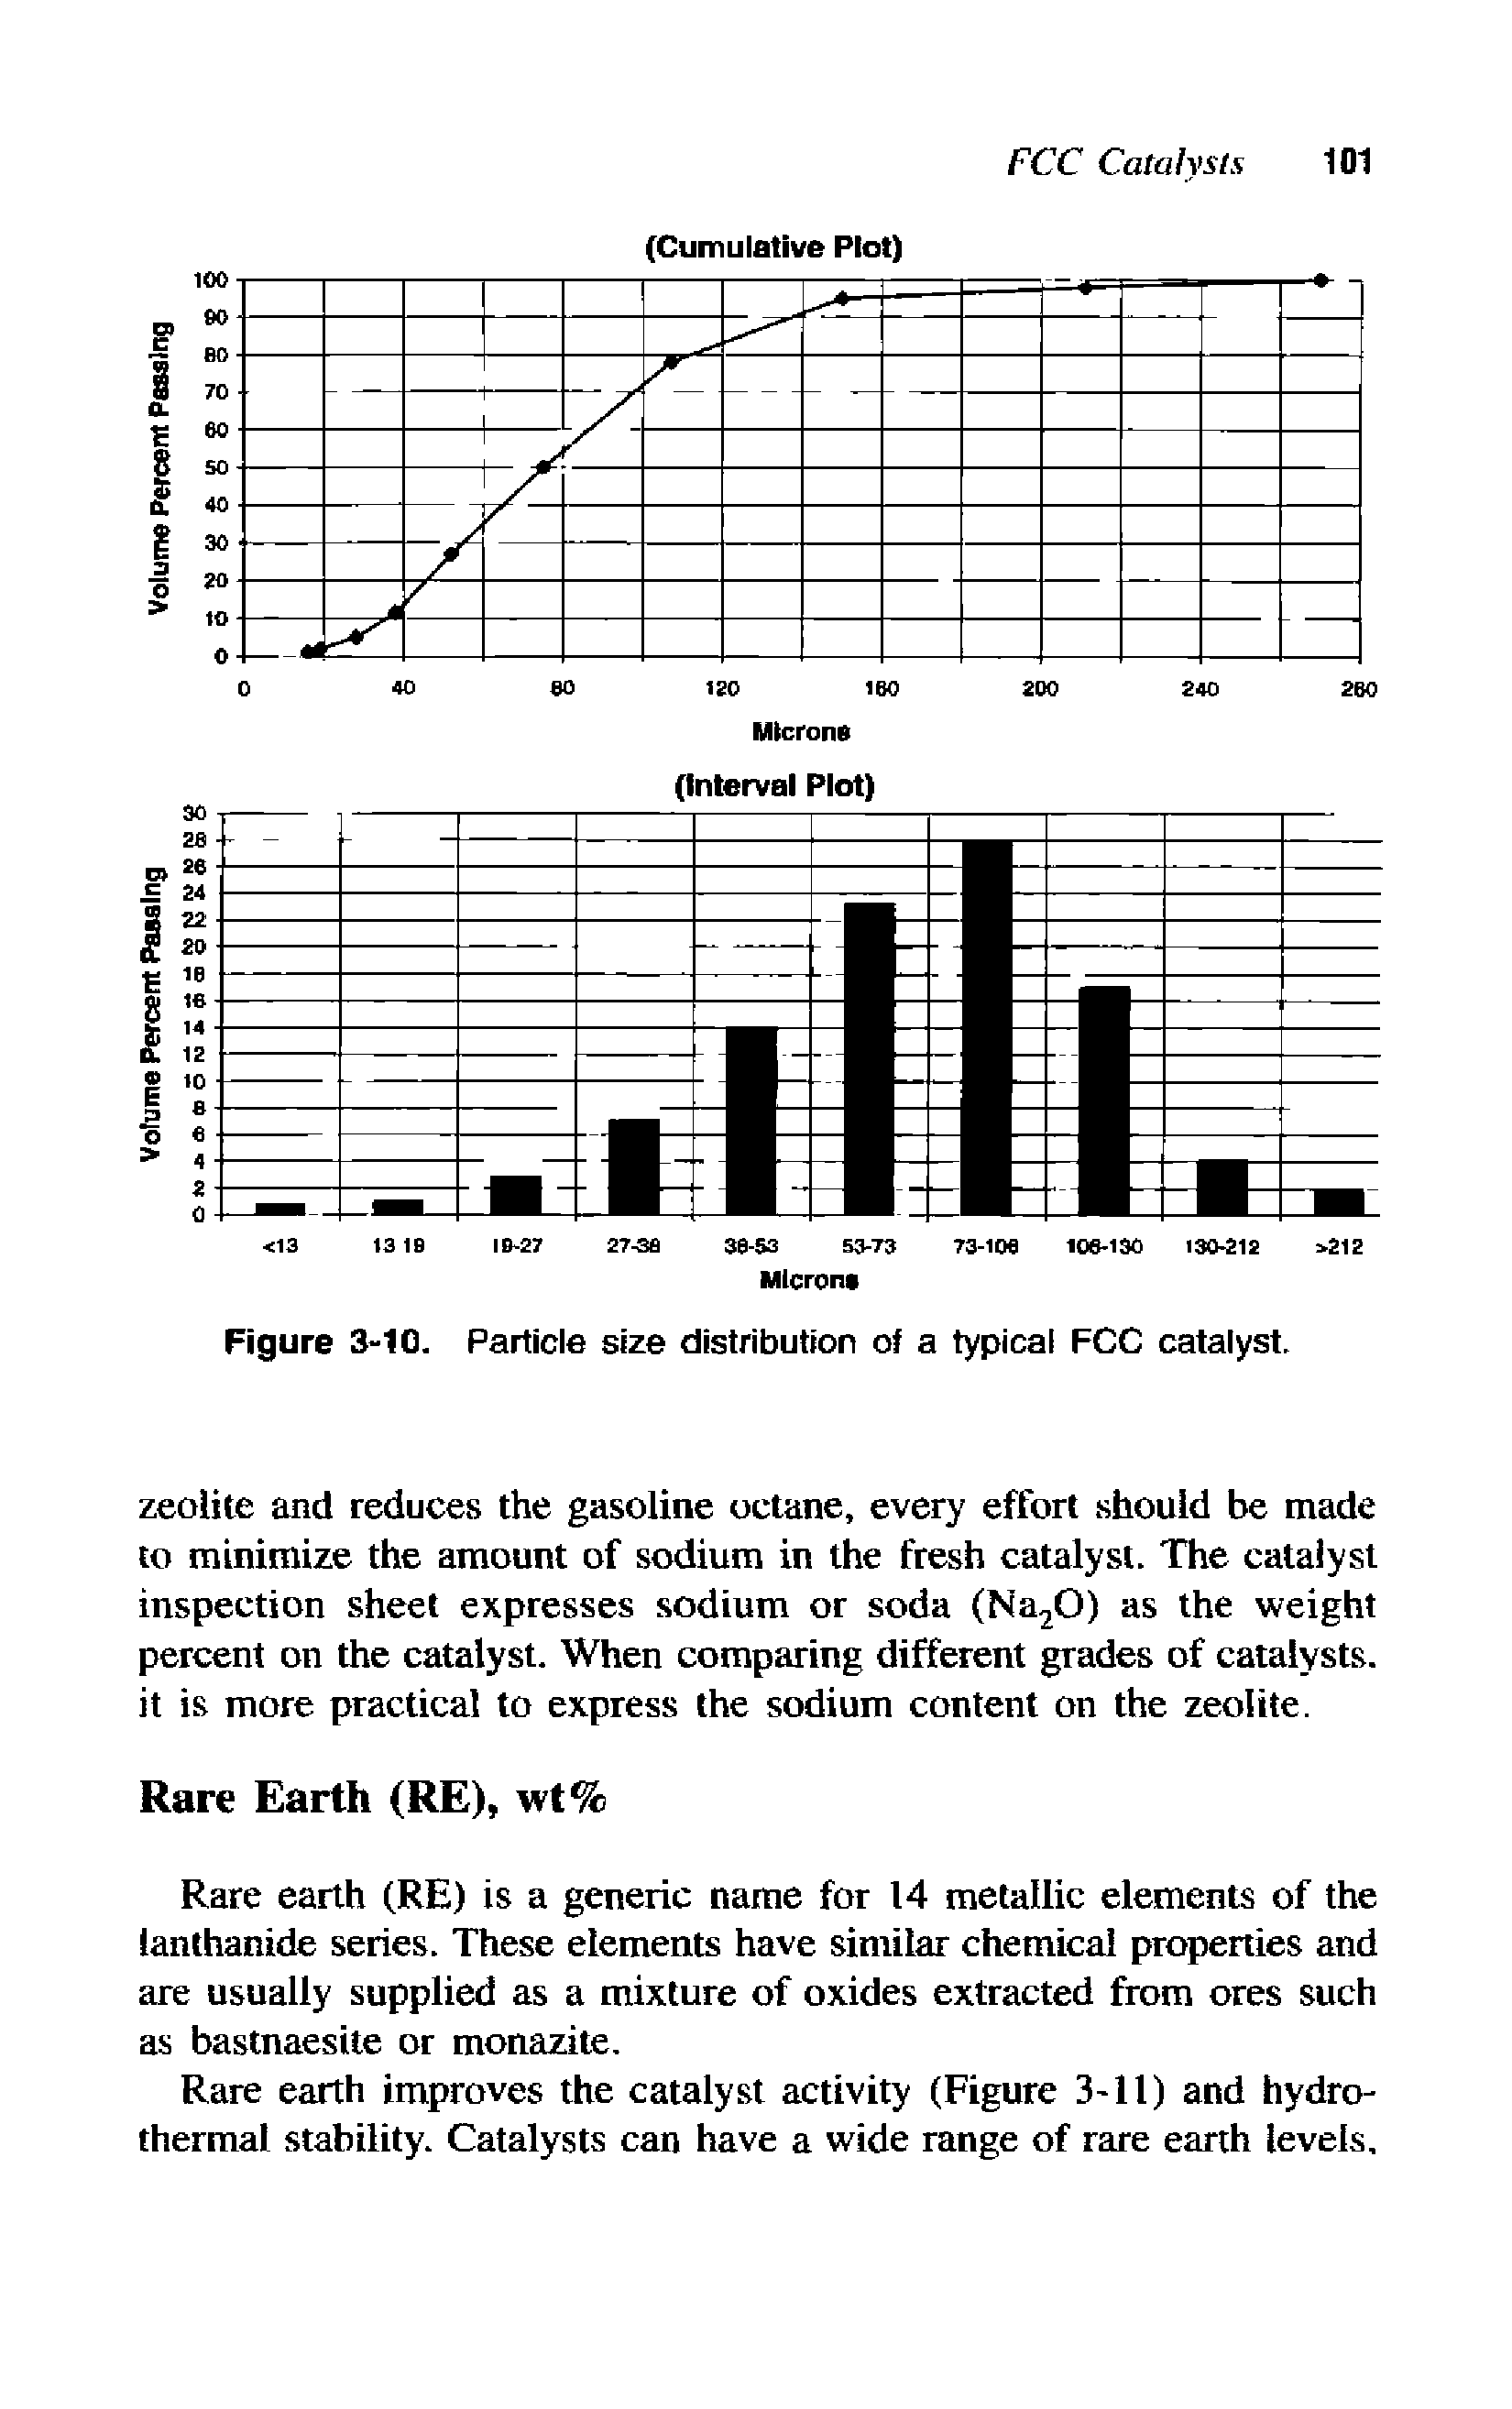 Figure 3-10. Particle size distribution of a typical FCC catalyst.